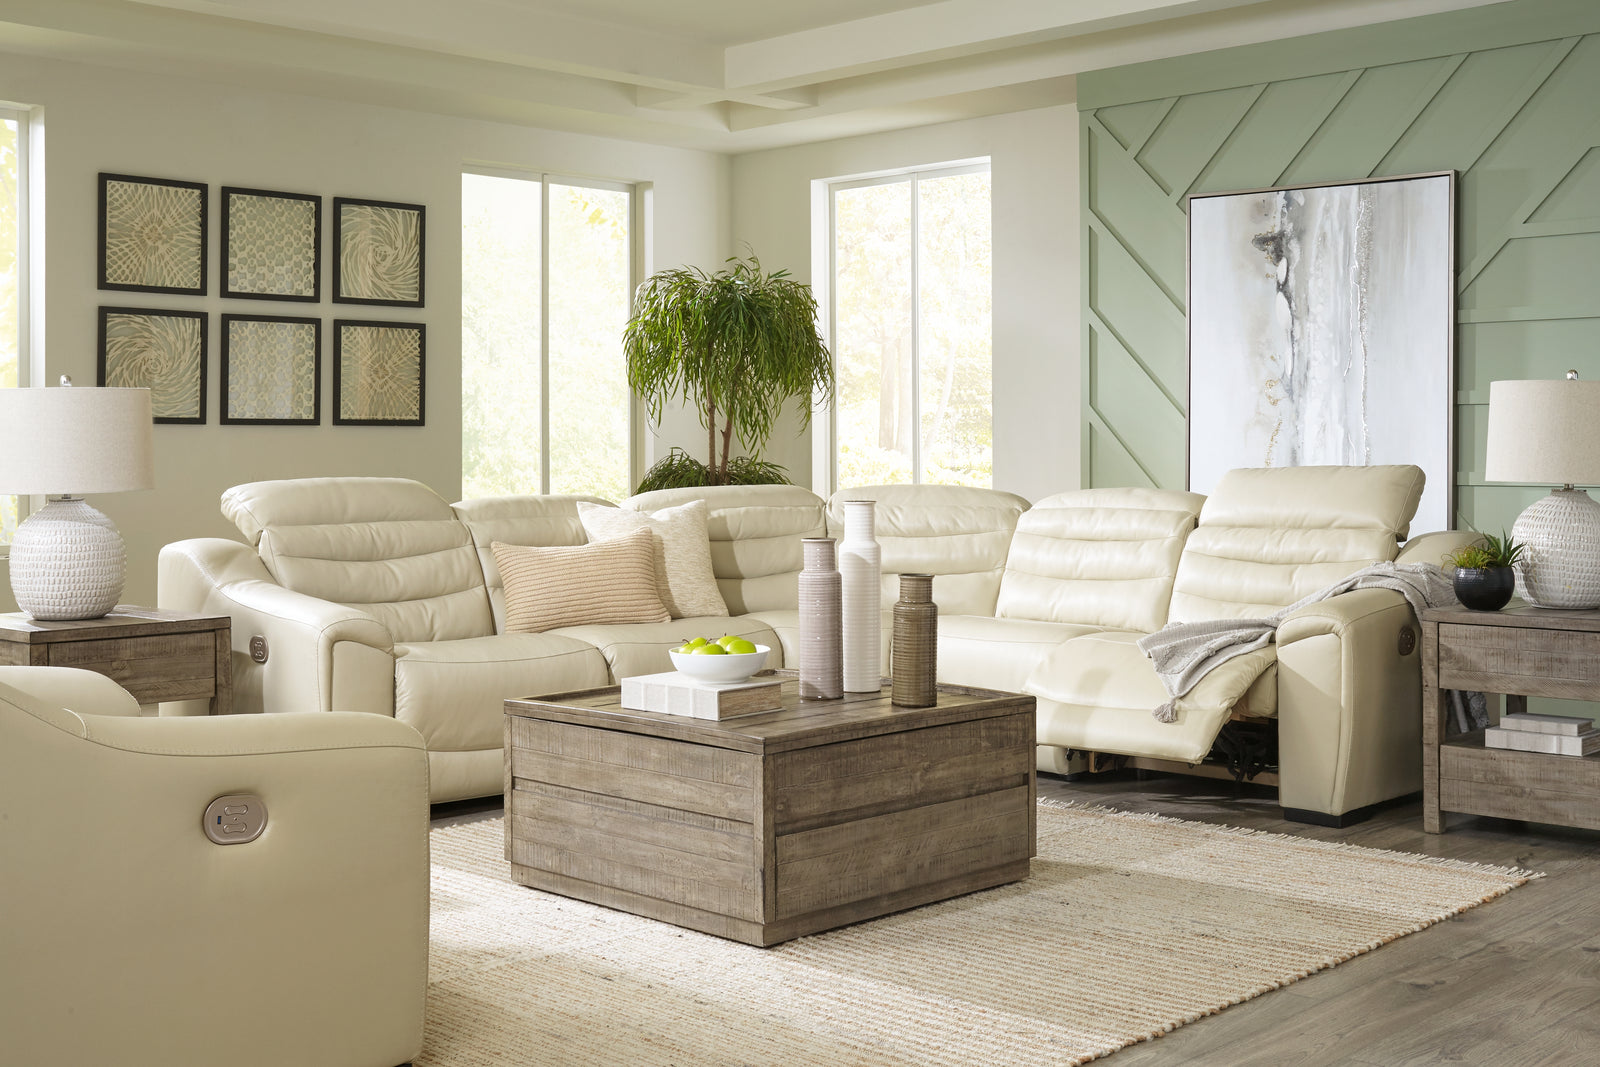 Center Cream Line 5-Piece Sectional With Recliner